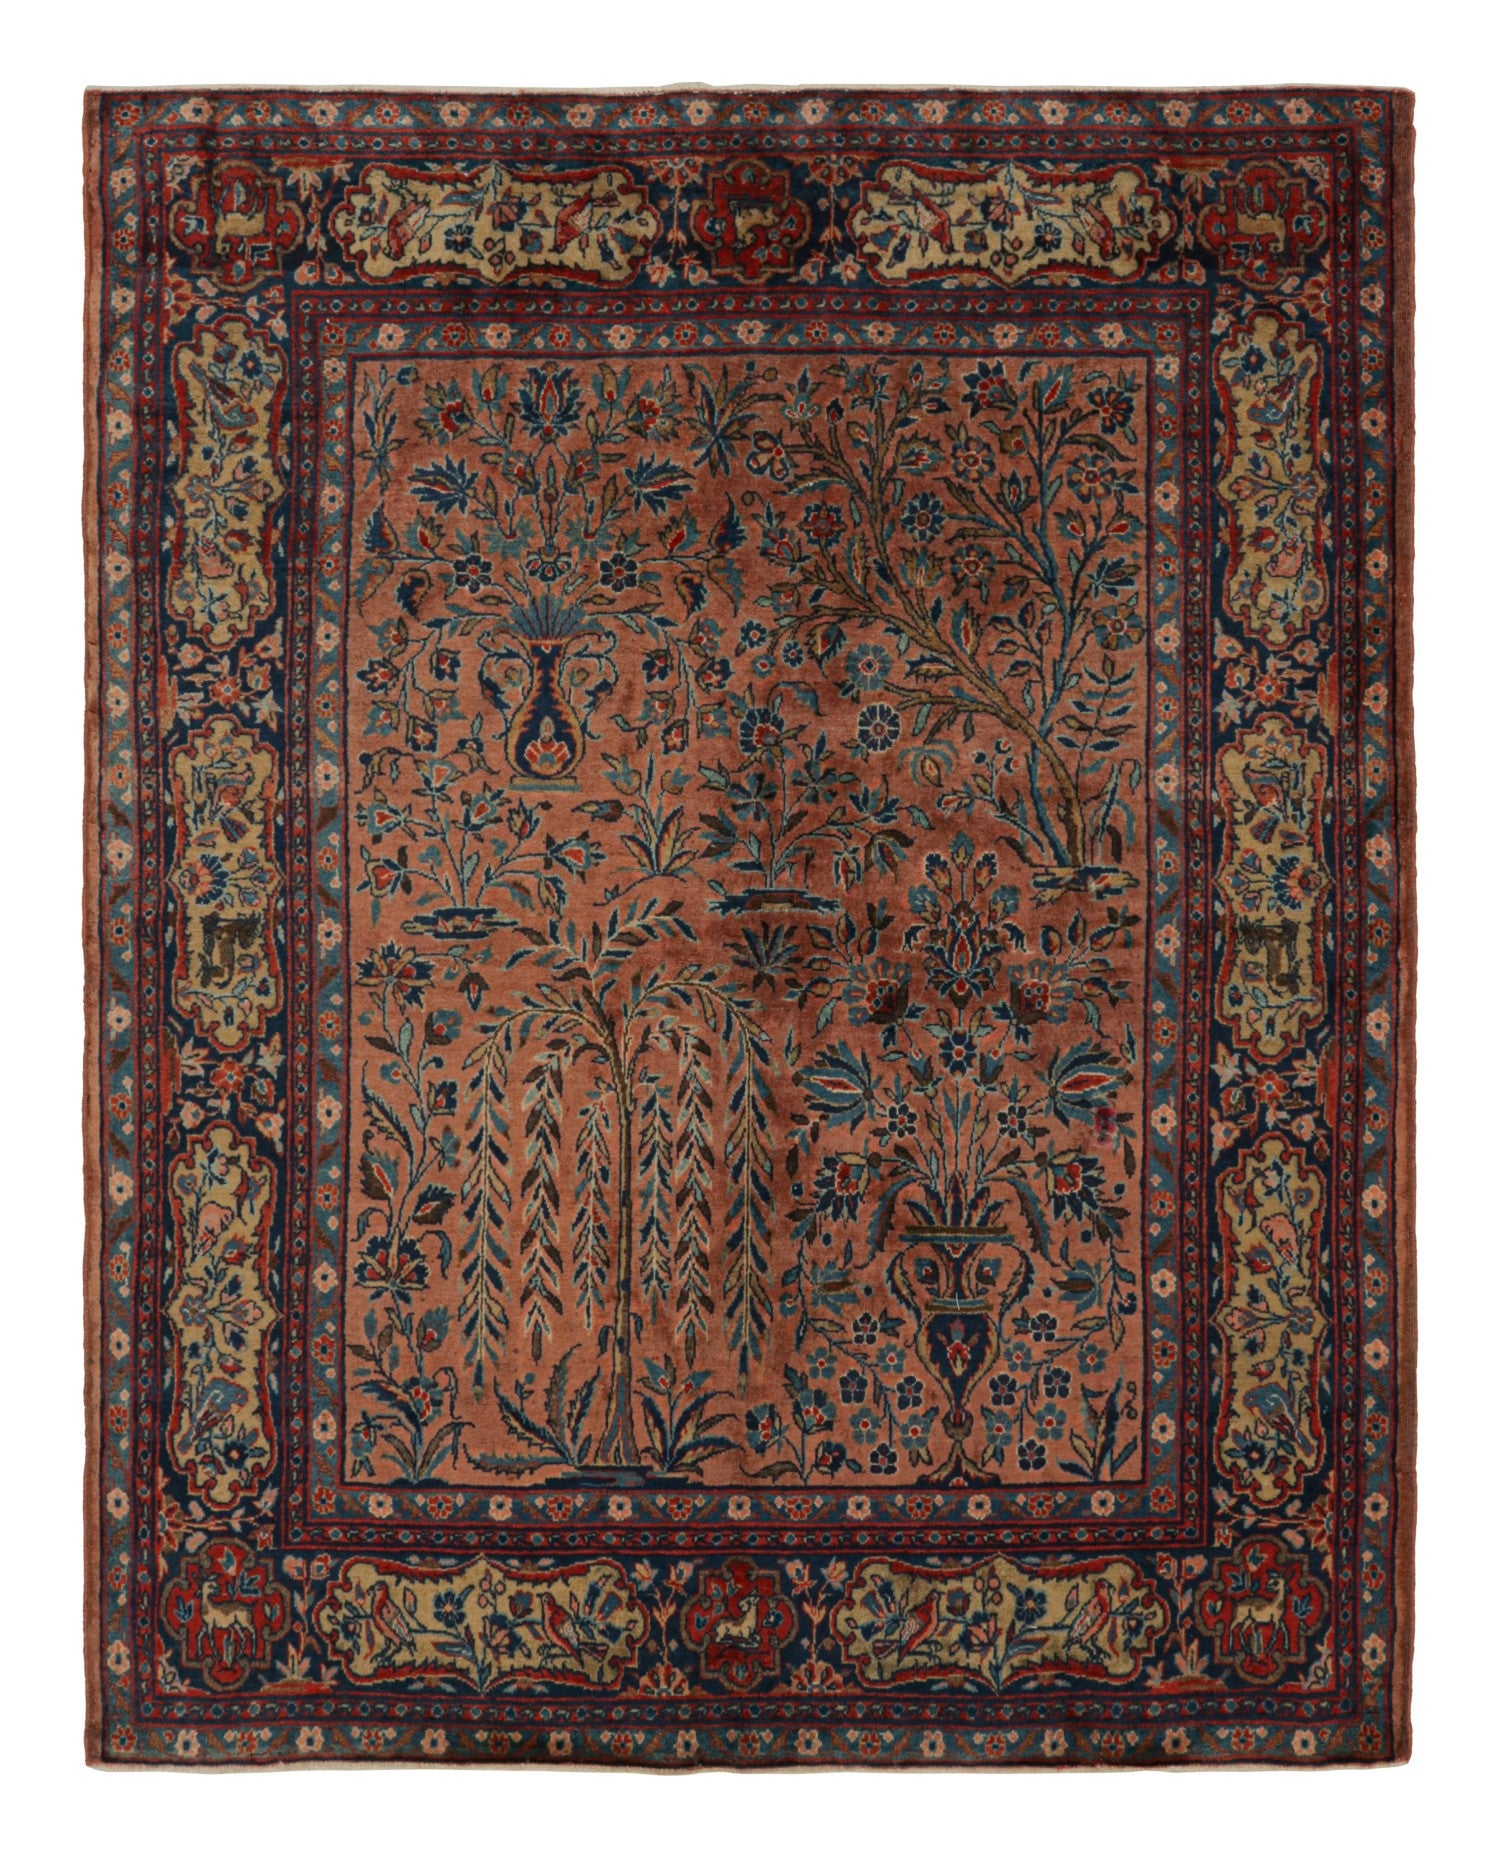 Antique Persian Kashan rug with Pictorial and Floral Patterns, from Rug & Kilim  For Sale